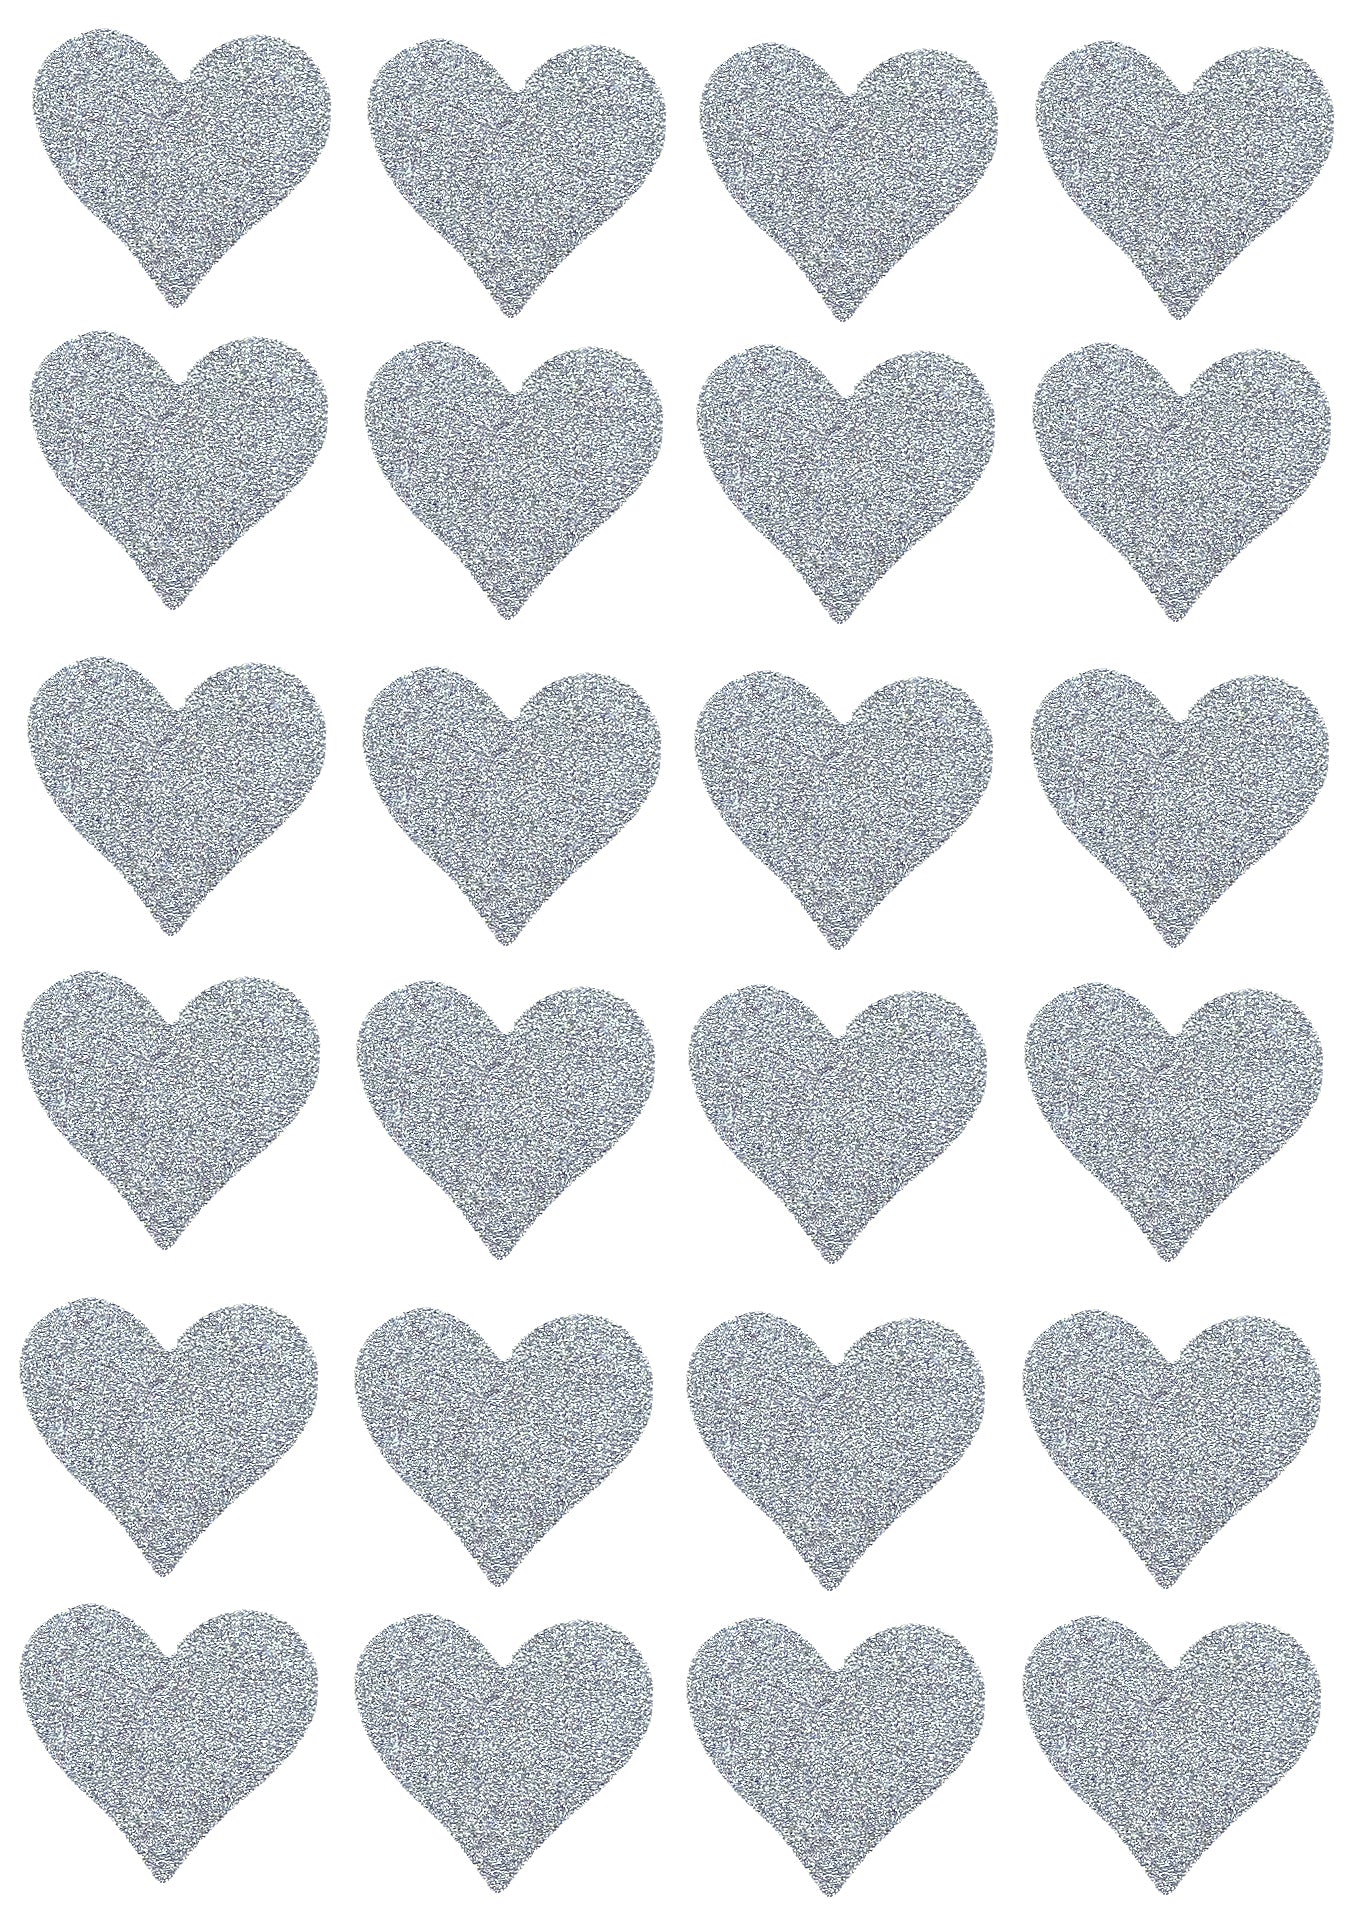 CLEARANCE - Beautiful .5 Silver Glitter Mini Heart Stickers with